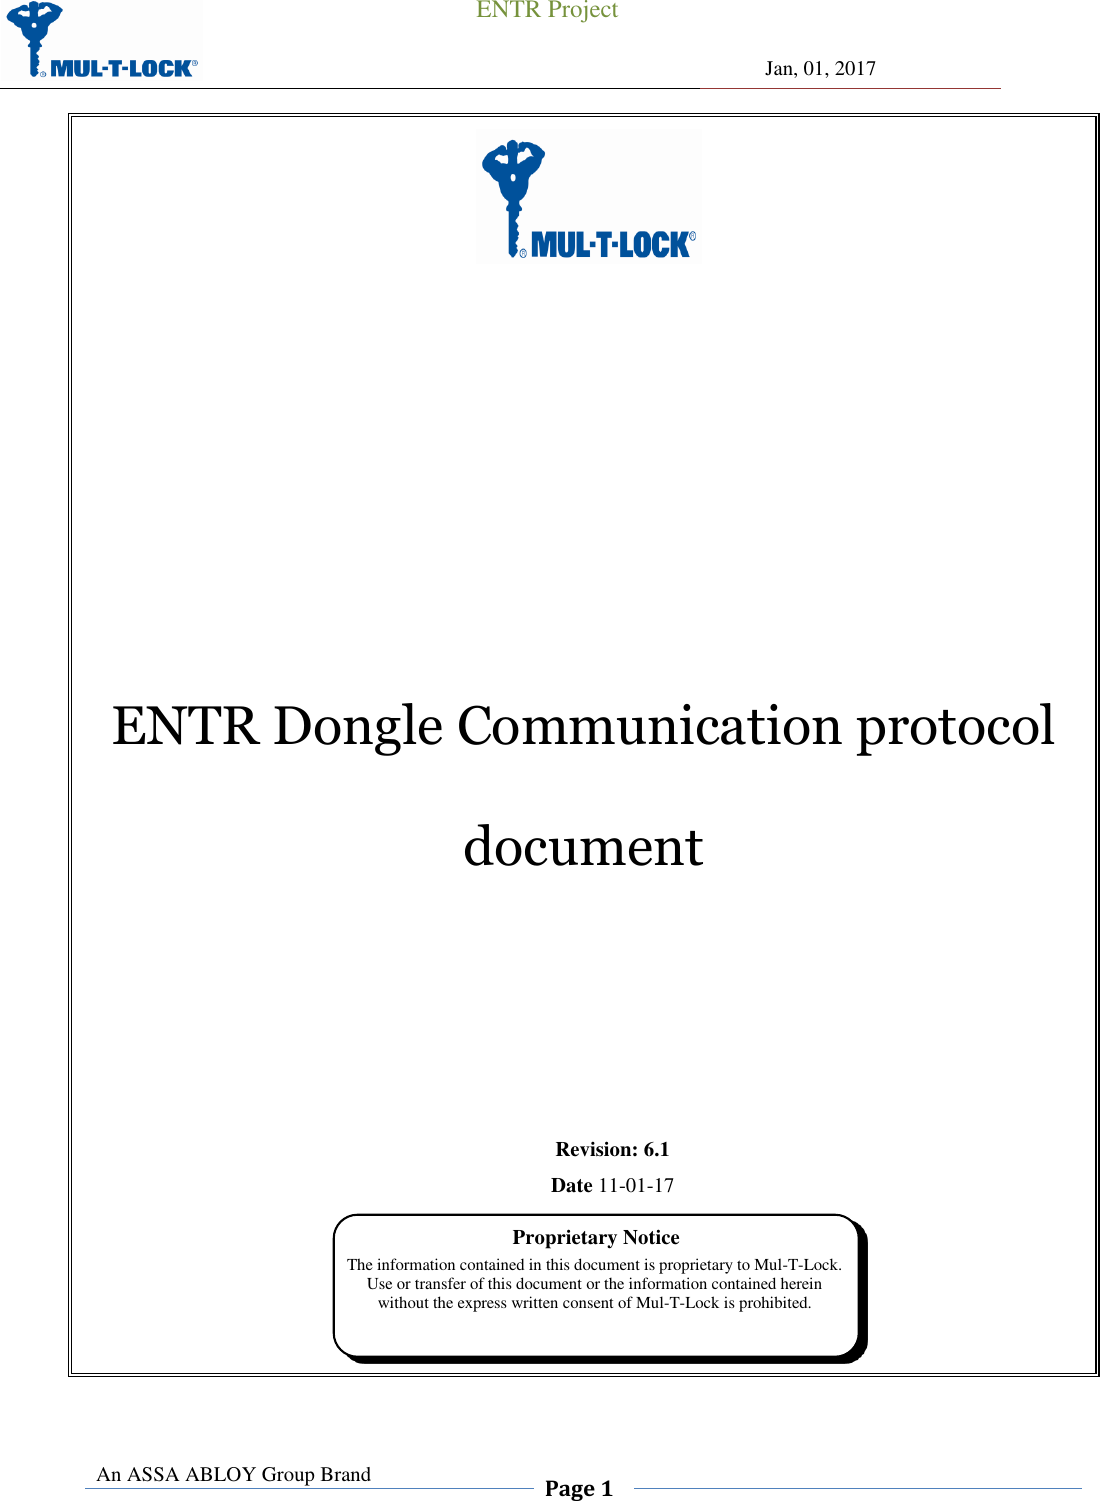                                                 ENTR Project                Jan, 01, 2017  An ASSA ABLOY Group Brand  Page 1      ENTR Dongle Communication protocol document  Revision: 6.1  Date 11-01-17      Proprietary Notice The information contained in this document is proprietary to Mul-T-Lock. Use or transfer of this document or the information contained herein without the express written consent of Mul-T-Lock is prohibited. 